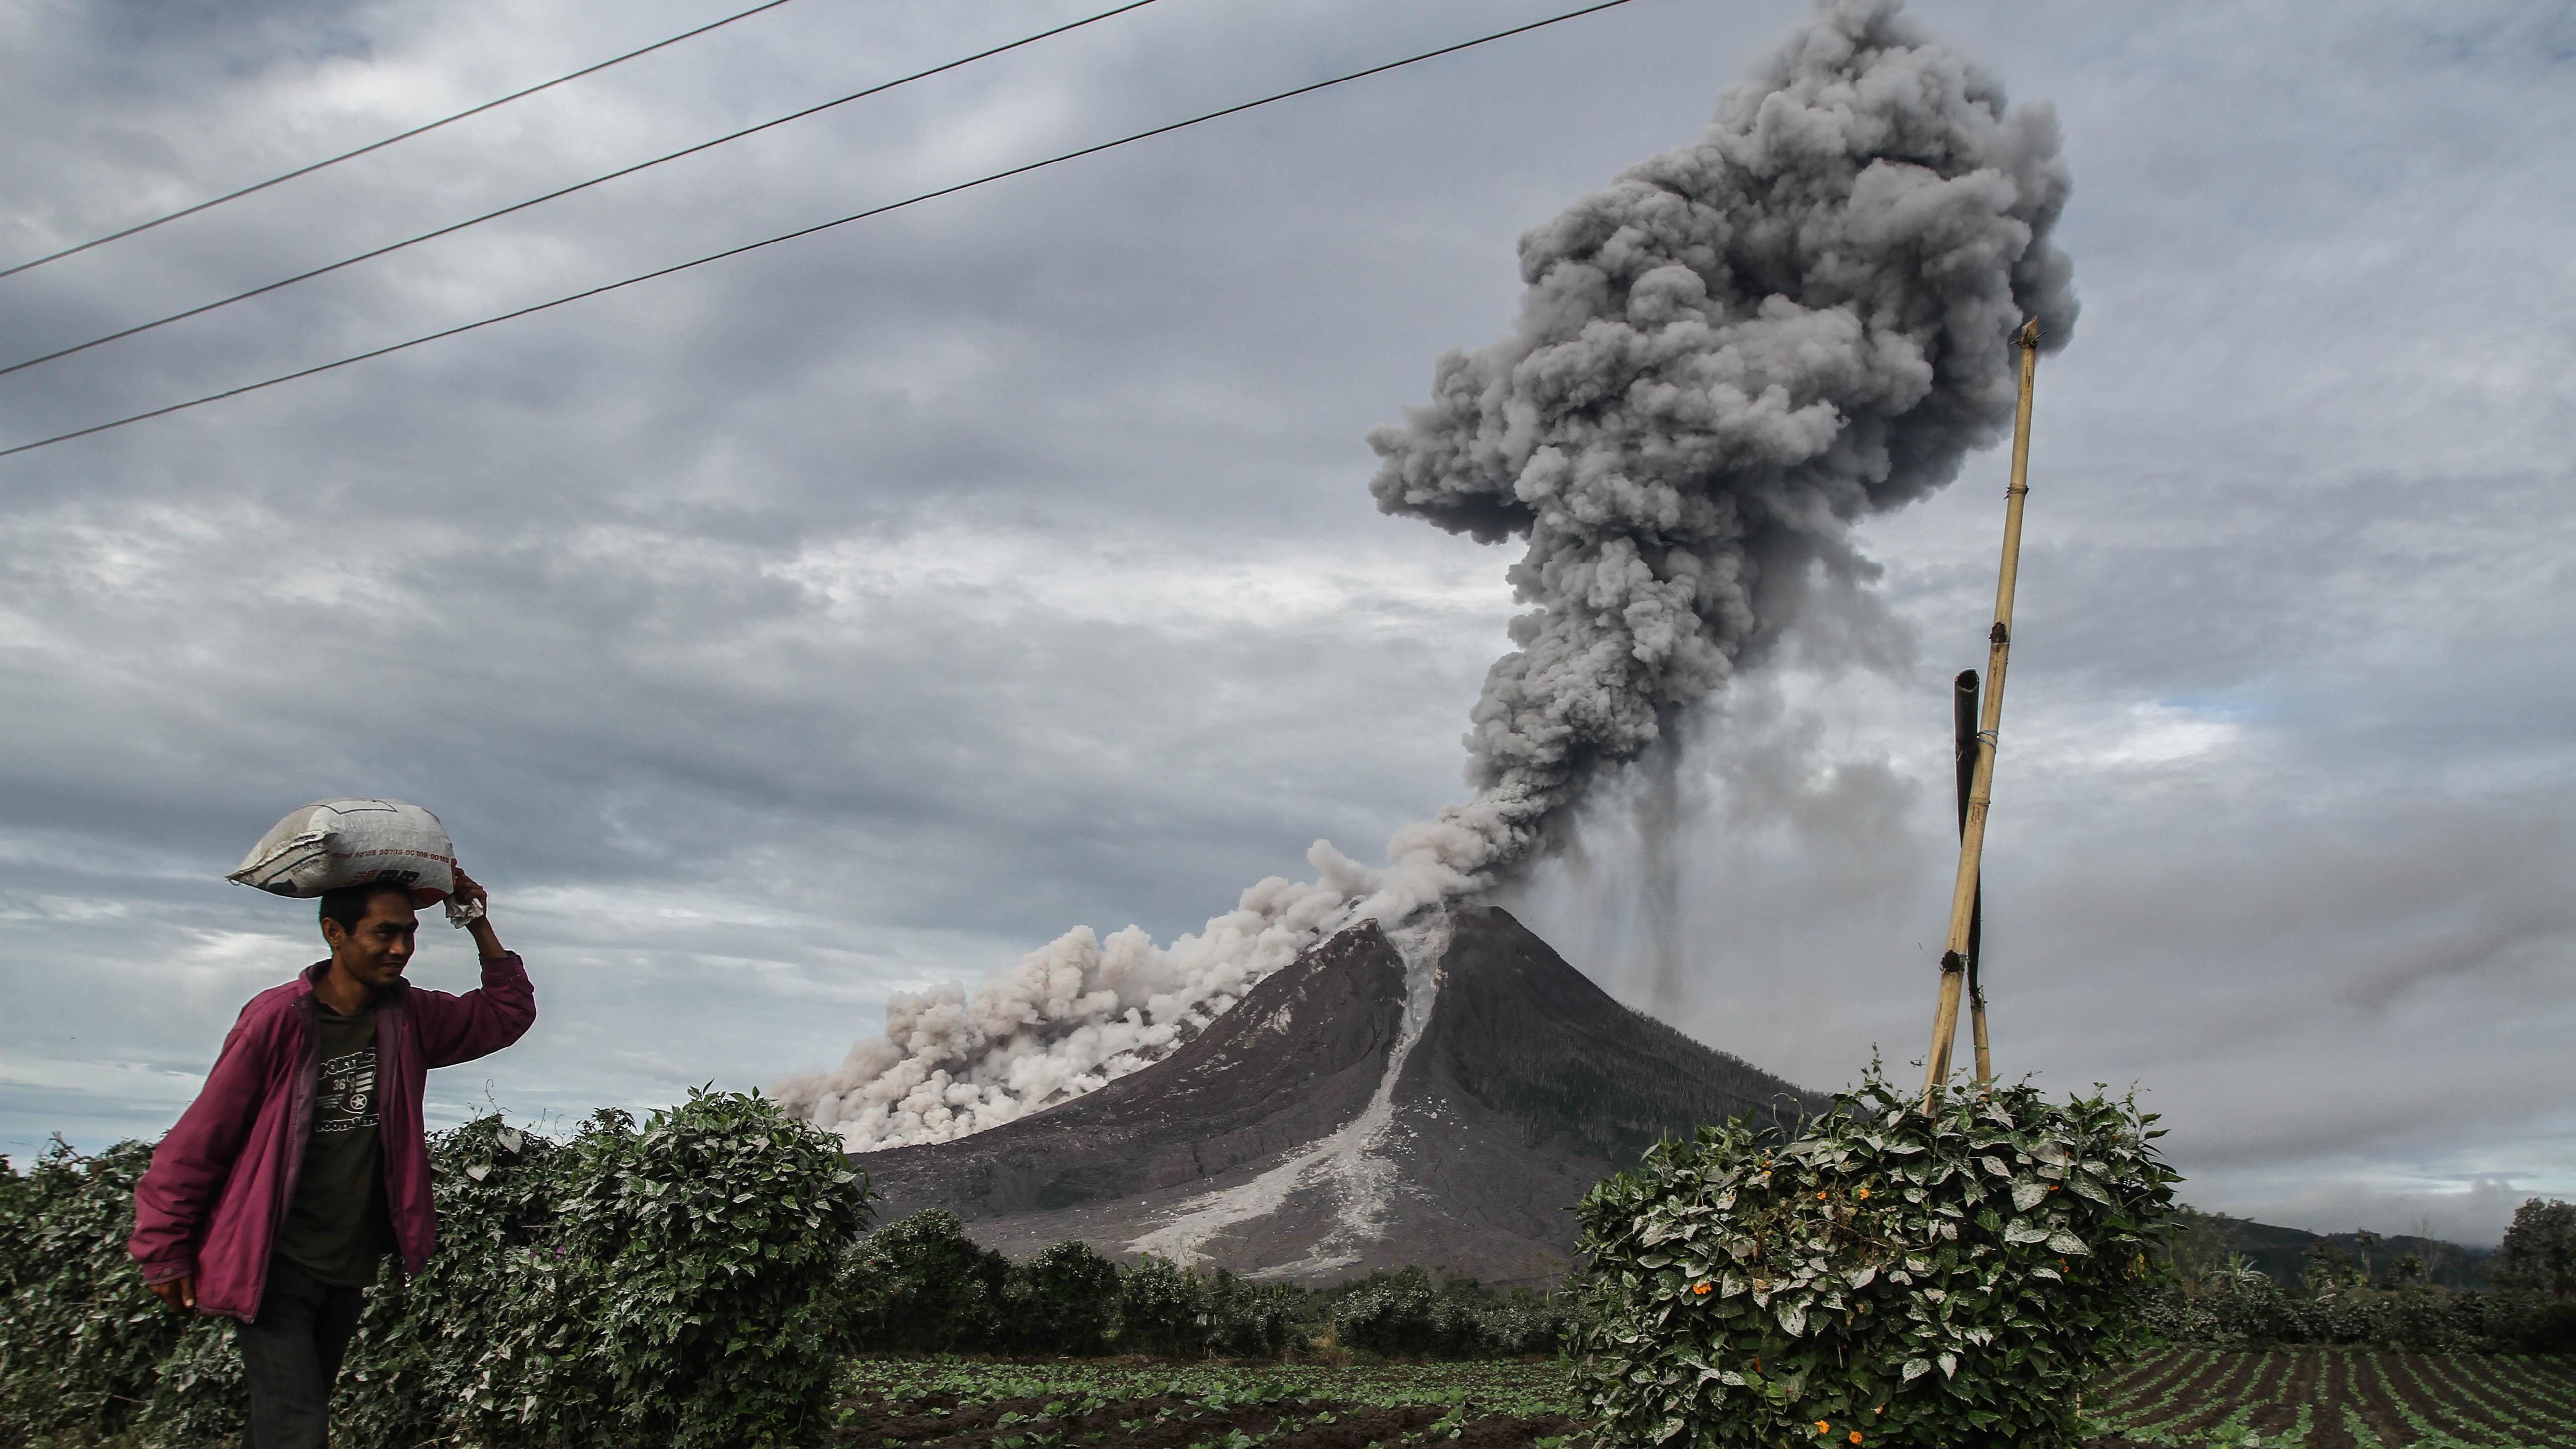 An Indonesian farmer passes a field as Mount Sinabung volcano spews thick smoke into the air in Karo, North Sumatra earlier this month. The volcano roared back to life in 2010 for the first time in 400 years, after another period of inactivity it erupted once more in 2013, and has remained highly active since.
